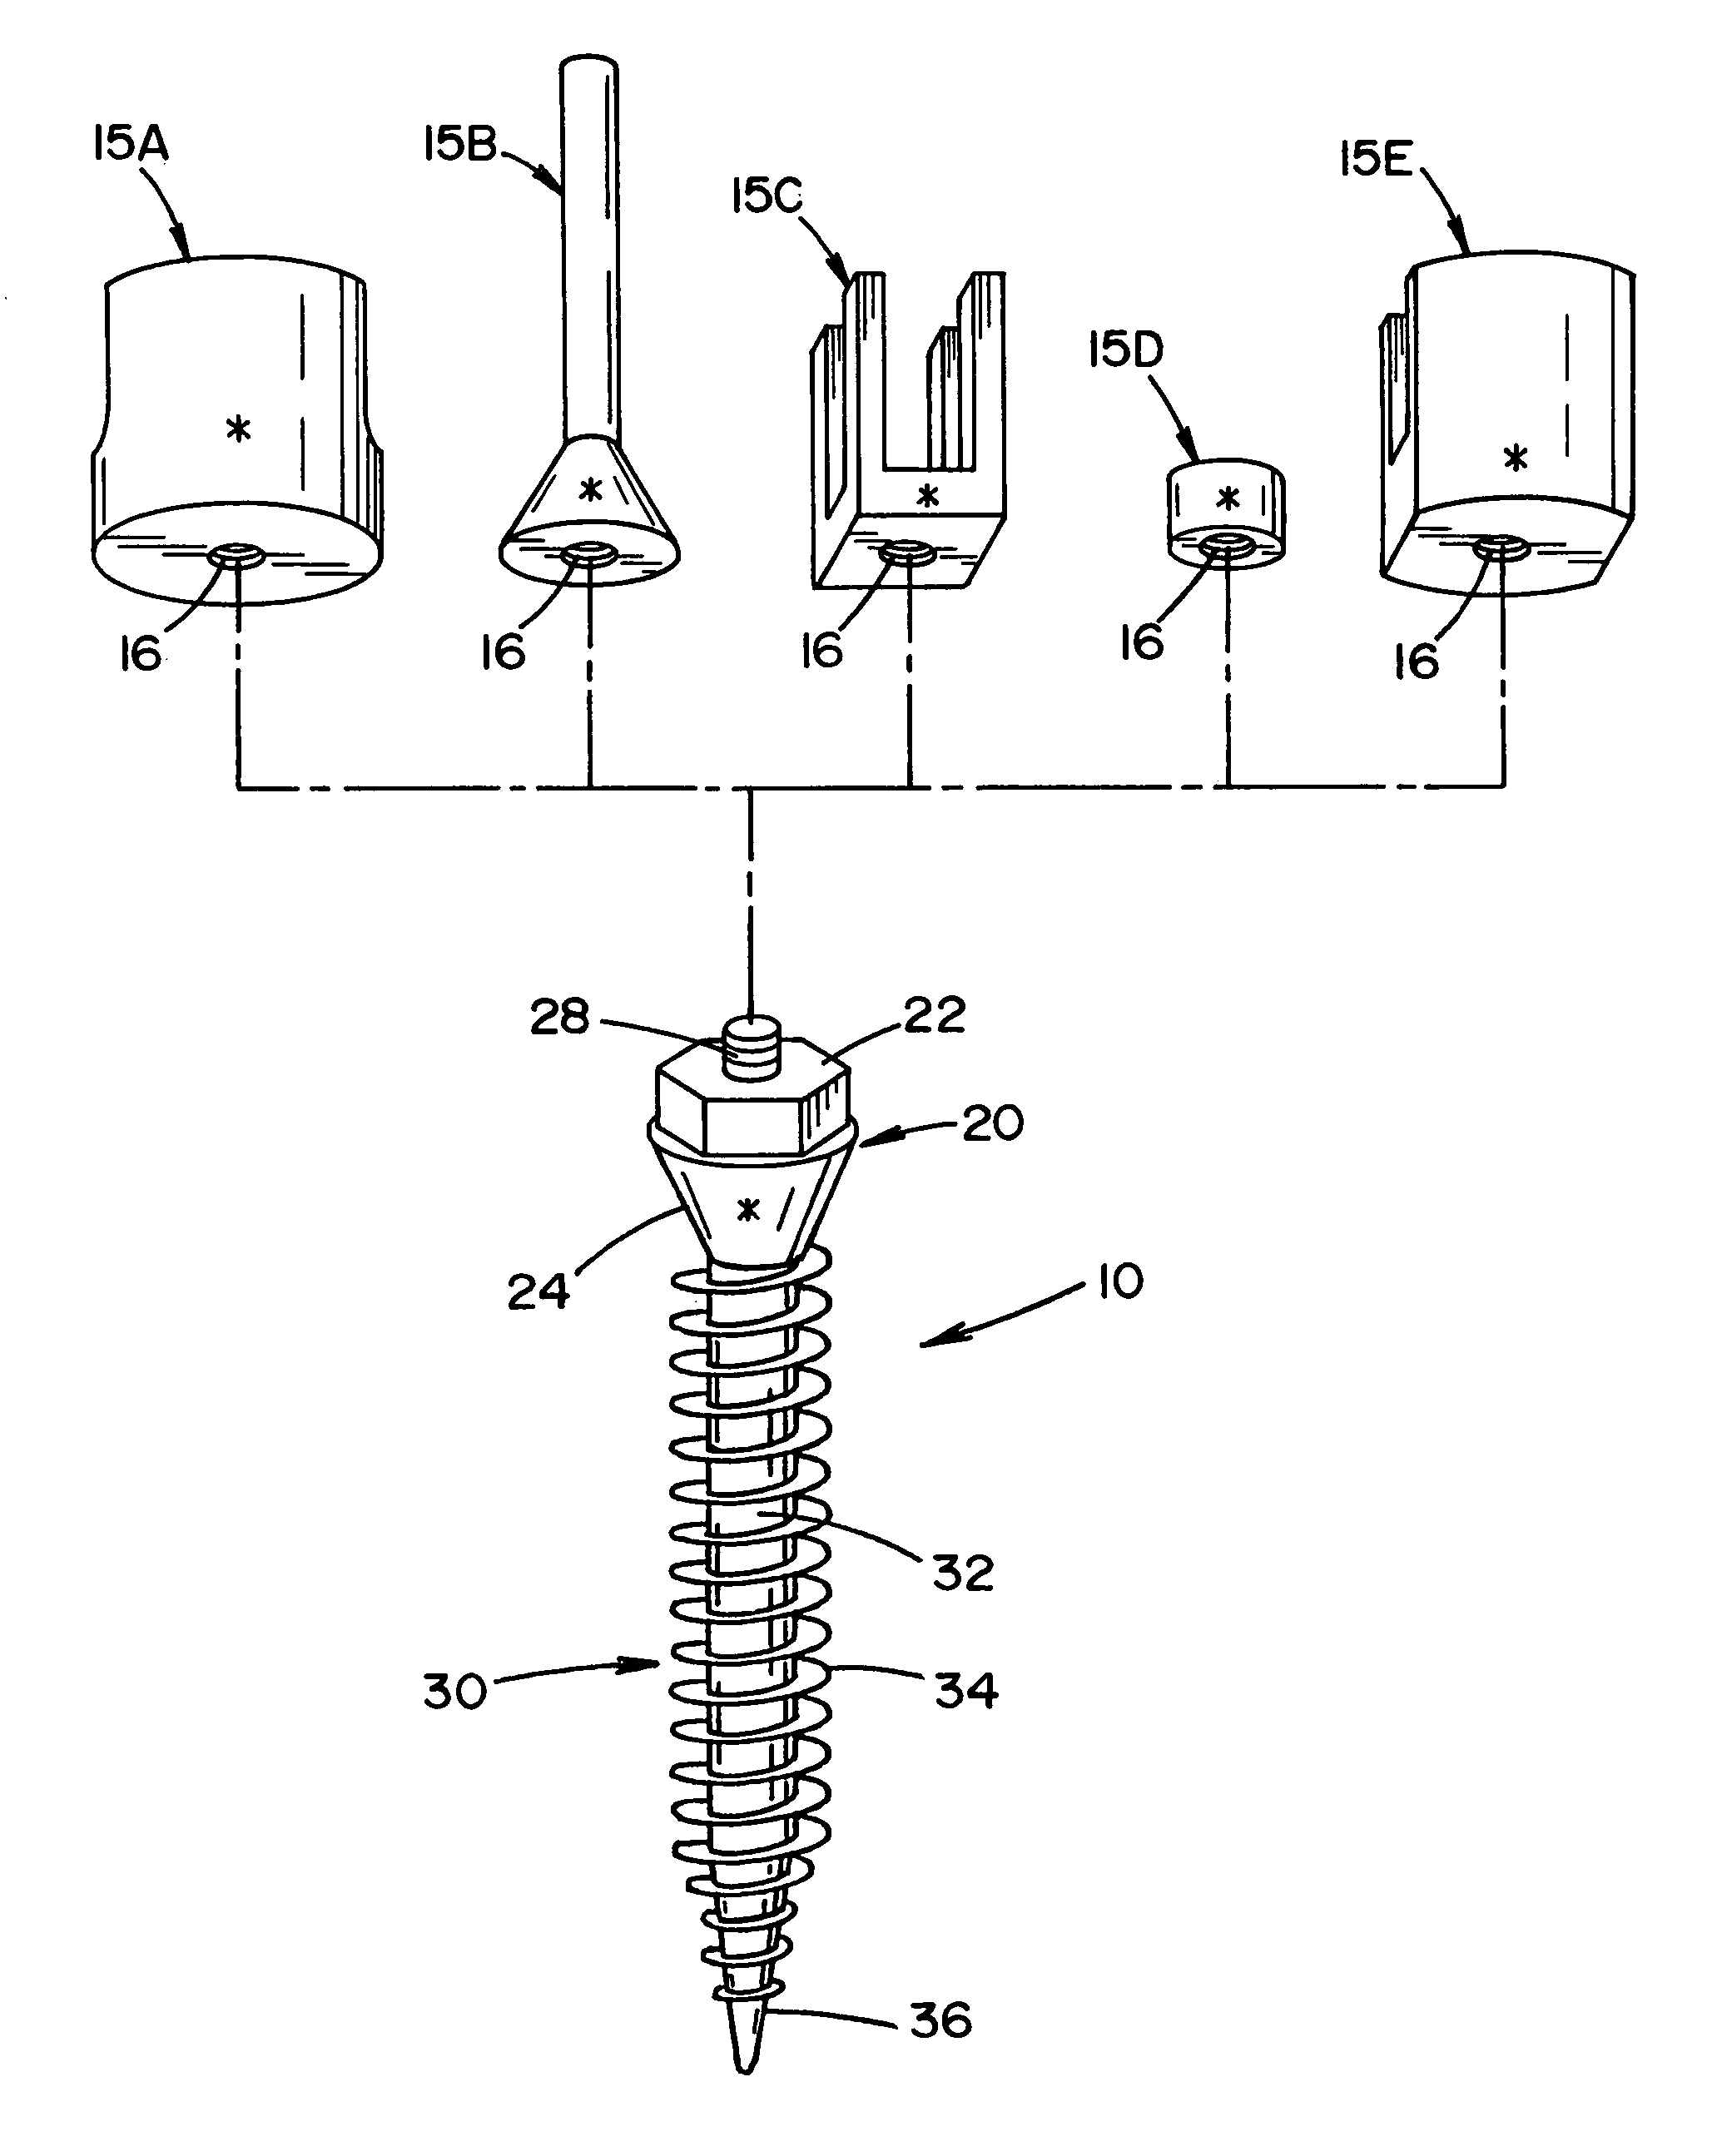 Bone anchor prosthesis and system